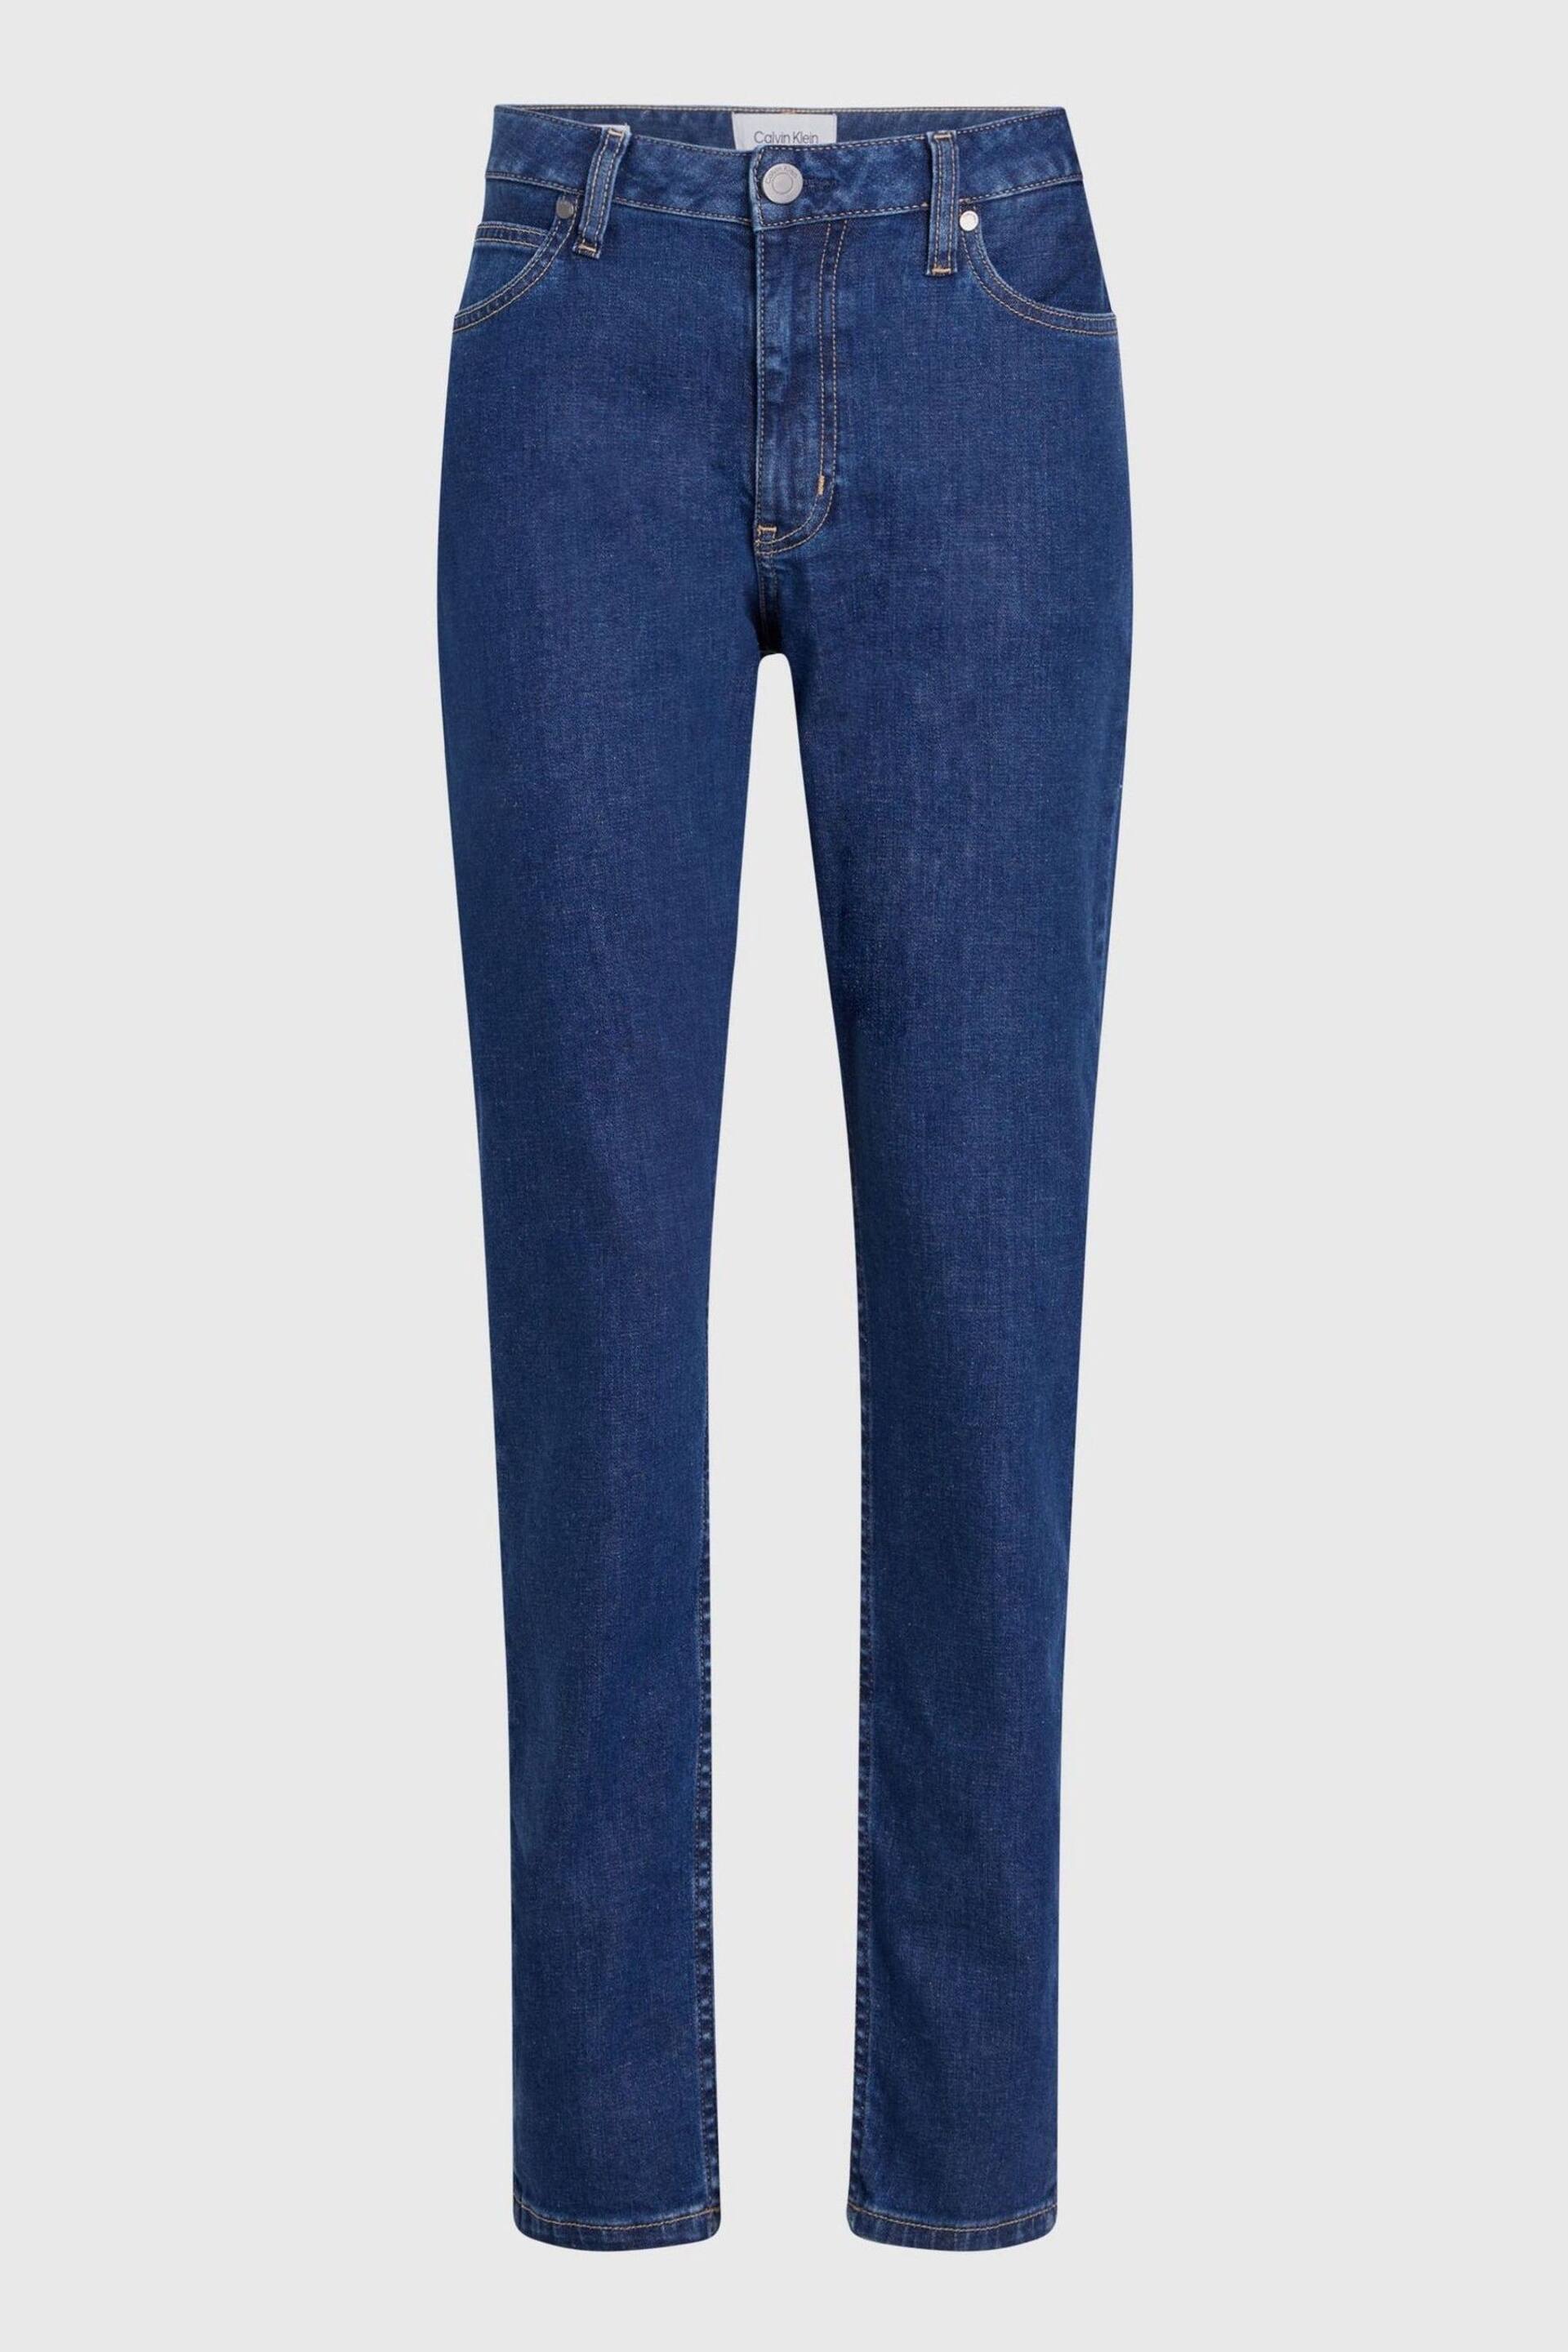 Calvin Klein Blue Slim Mid Rise Jeans - Image 5 of 5